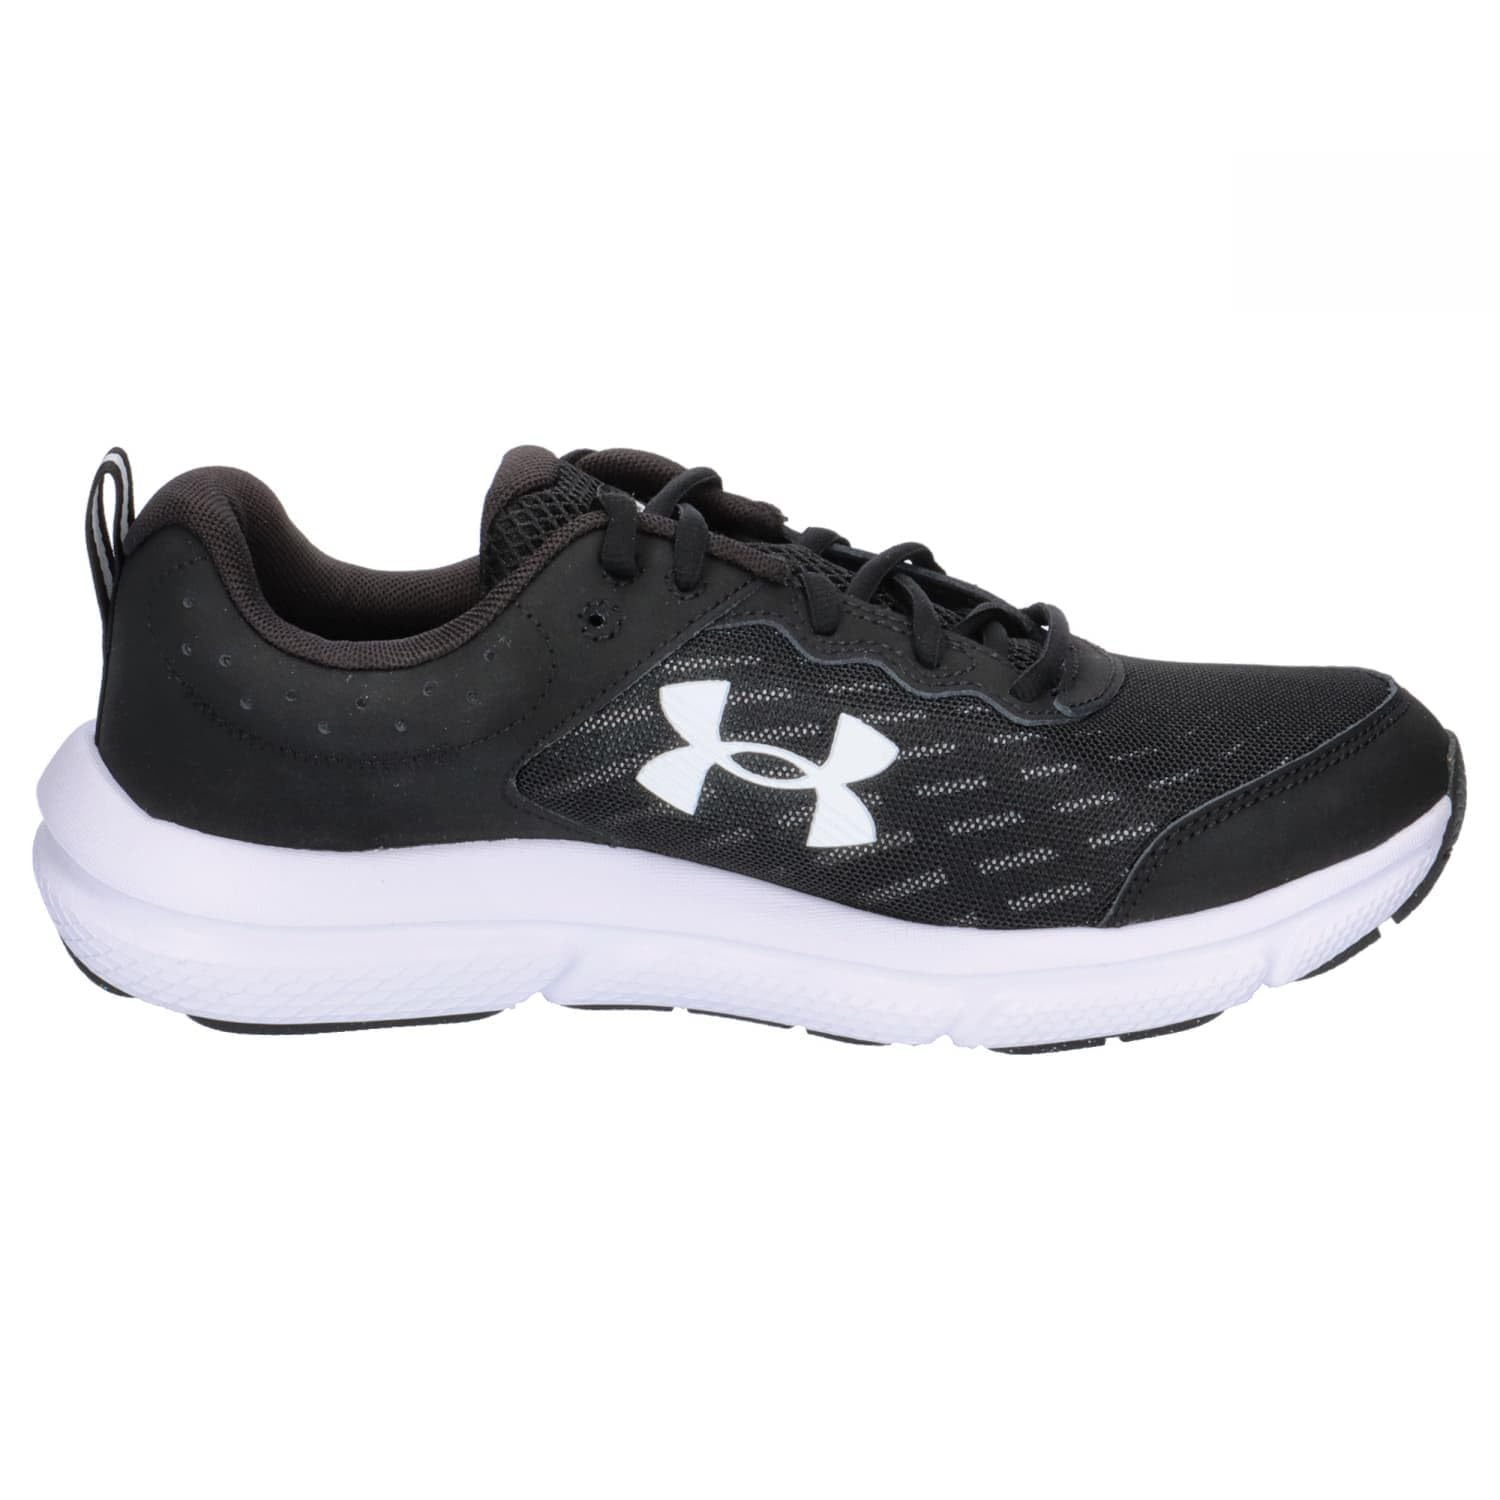 Under Armour mens Charged Assert 10